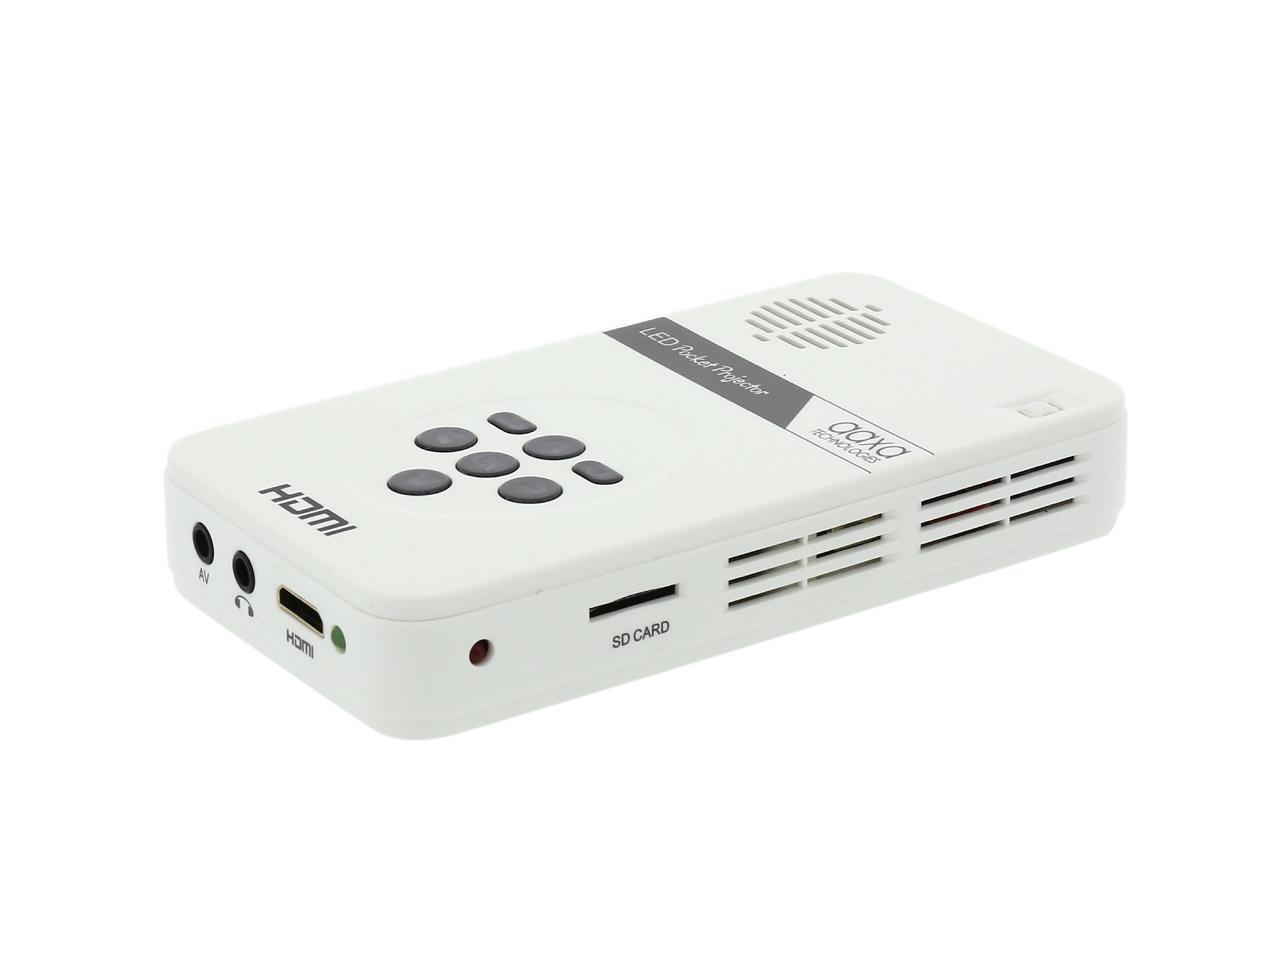 AAXA LED Pico Mini Projector with Battery, HDMI, and Native 720p HD Resolution Home and Travel - Newegg.com